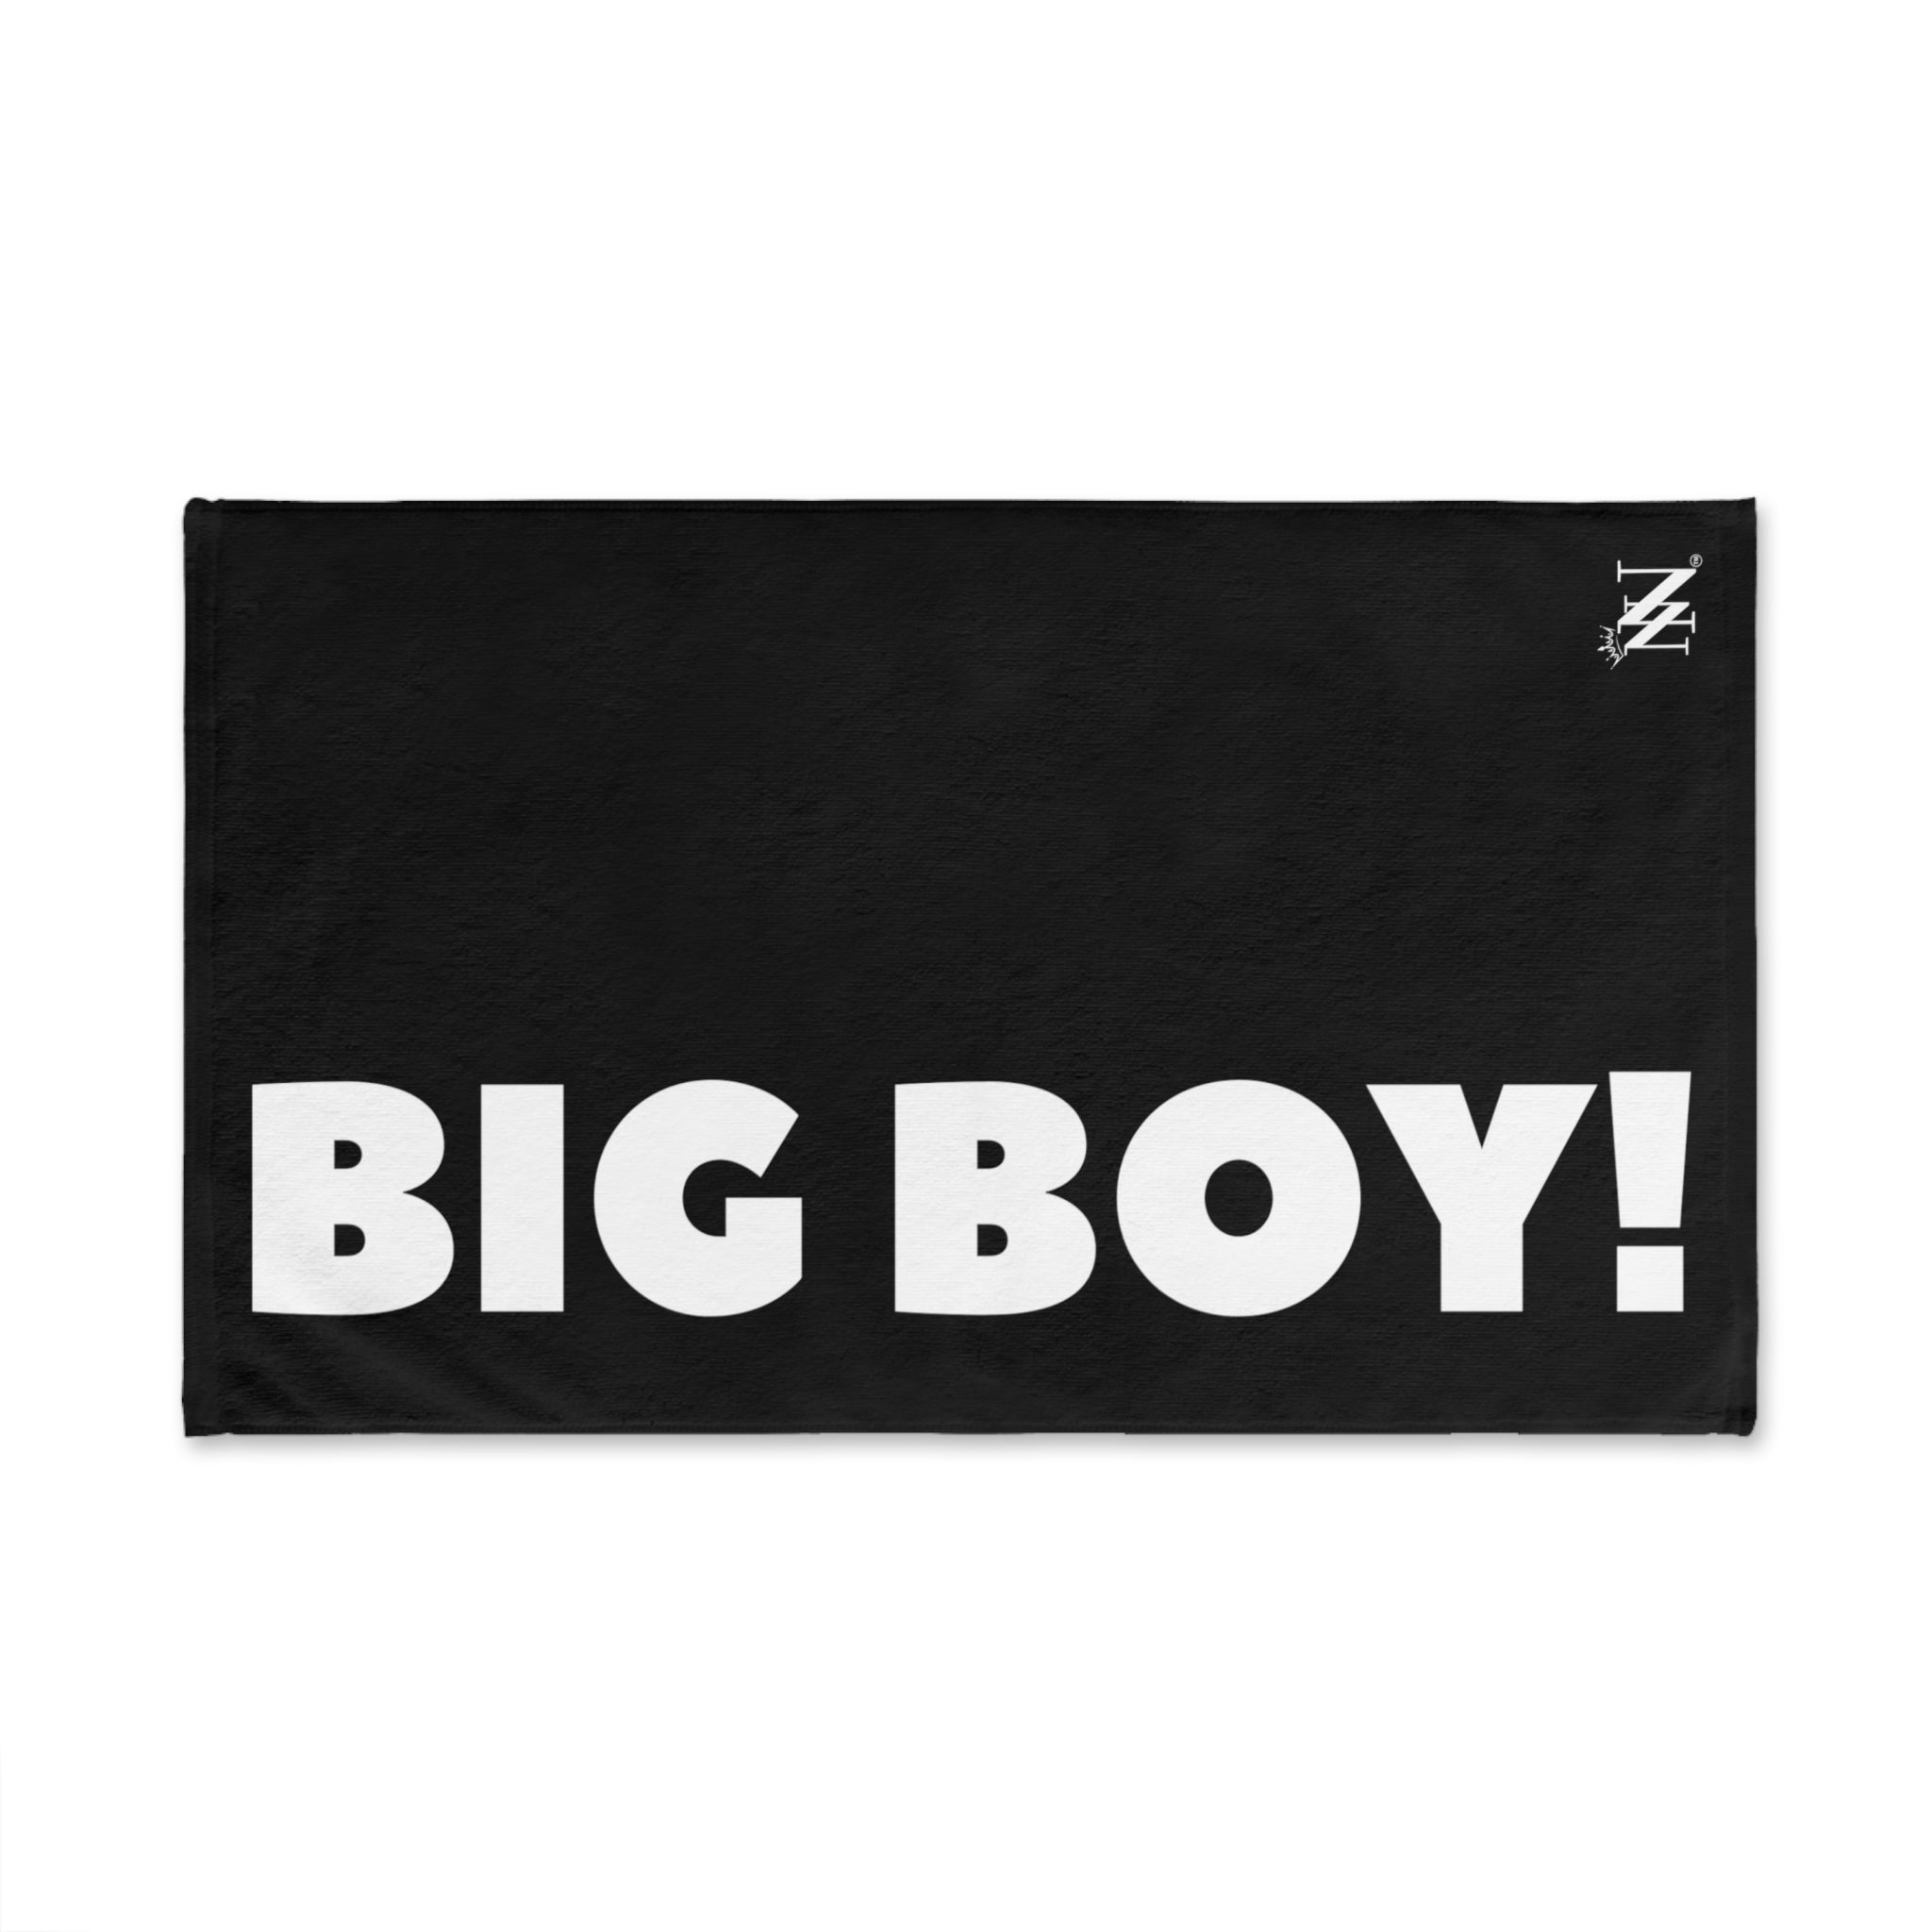 Big Boy Man Black | Sexy Gifts for Boyfriend, Funny Towel Romantic Gift for Wedding Couple Fiance First Year 2nd Anniversary Valentines, Party Gag Gifts, Joke Humor Cloth for Husband Men BF NECTAR NAPKINS